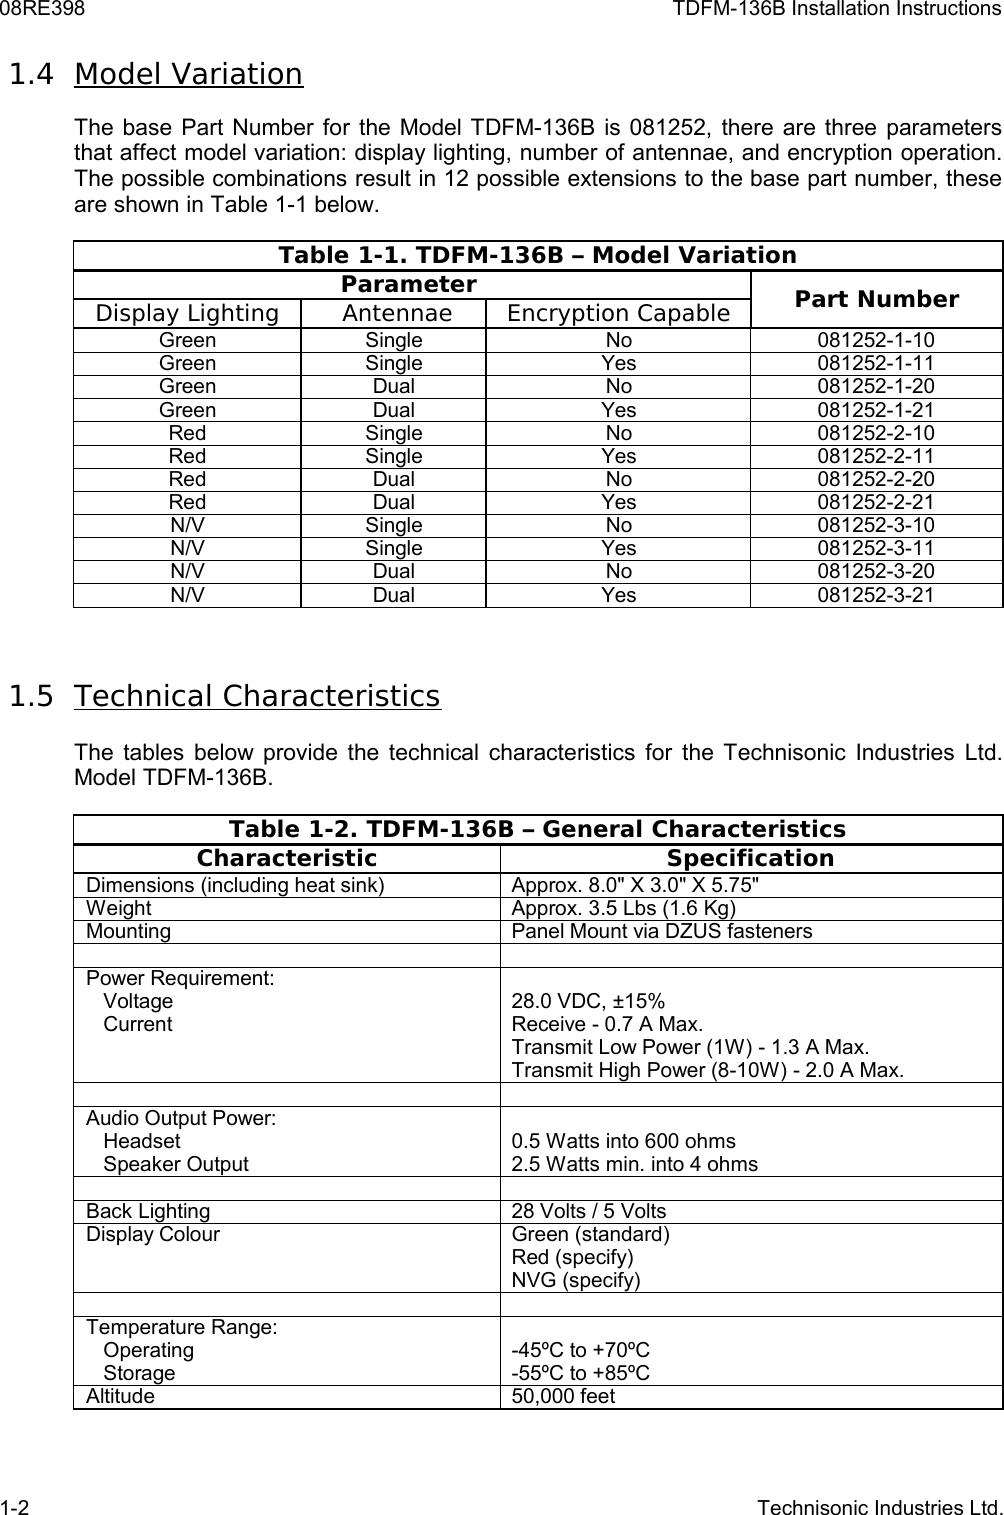 08RE398 TDFM-136B Installation Instructions 1.4  Model VariationThe base Part Number for the Model TDFM-136B is 081252, there are three parameters that affect model variation: display lighting, number of antennae, and encryption operation. The possible combinations result in 12 possible extensions to the base part number, these are shown in Table 1-1 below. Table 1-1. TDFM-136B – Model VariationParameter  Part NumberDisplay Lighting  Antennae Encryption CapableGreen Single No 081252-1-10Green Single Yes 081252-1-11Green Dual No 081252-1-20Green Dual Yes 081252-1-21Red Single No 081252-2-10Red Single Yes 081252-2-11Red Dual No 081252-2-20Red Dual Yes 081252-2-21N/V Single No 081252-3-10N/V Single Yes 081252-3-11N/V Dual No 081252-3-20N/V Dual Yes 081252-3-21 1.5  Technical CharacteristicsThe tables below provide the technical characteristics for the Technisonic Industries Ltd. Model TDFM-136B.Table 1-2. TDFM-136B – General CharacteristicsCharacteristic SpecificationDimensions (including heat sink) Approx. 8.0&quot; X 3.0&quot; X 5.75&quot;Weight Approx. 3.5 Lbs (1.6 Kg)Mounting Panel Mount via DZUS fastenersPower Requirement:   Voltage   Current28.0 VDC, ±15%Receive - 0.7 A Max.Transmit Low Power (1W) - 1.3 A Max.Transmit High Power (8-10W) - 2.0 A Max.Audio Output Power:   Headset   Speaker Output0.5 Watts into 600 ohms2.5 Watts min. into 4 ohmsBack Lighting 28 Volts / 5 VoltsDisplay Colour Green (standard)Red (specify)NVG (specify)Temperature Range:   Operating   Storage-45ºC to +70ºC-55ºC to +85ºCAltitude 50,000 feet1-2 Technisonic Industries Ltd.